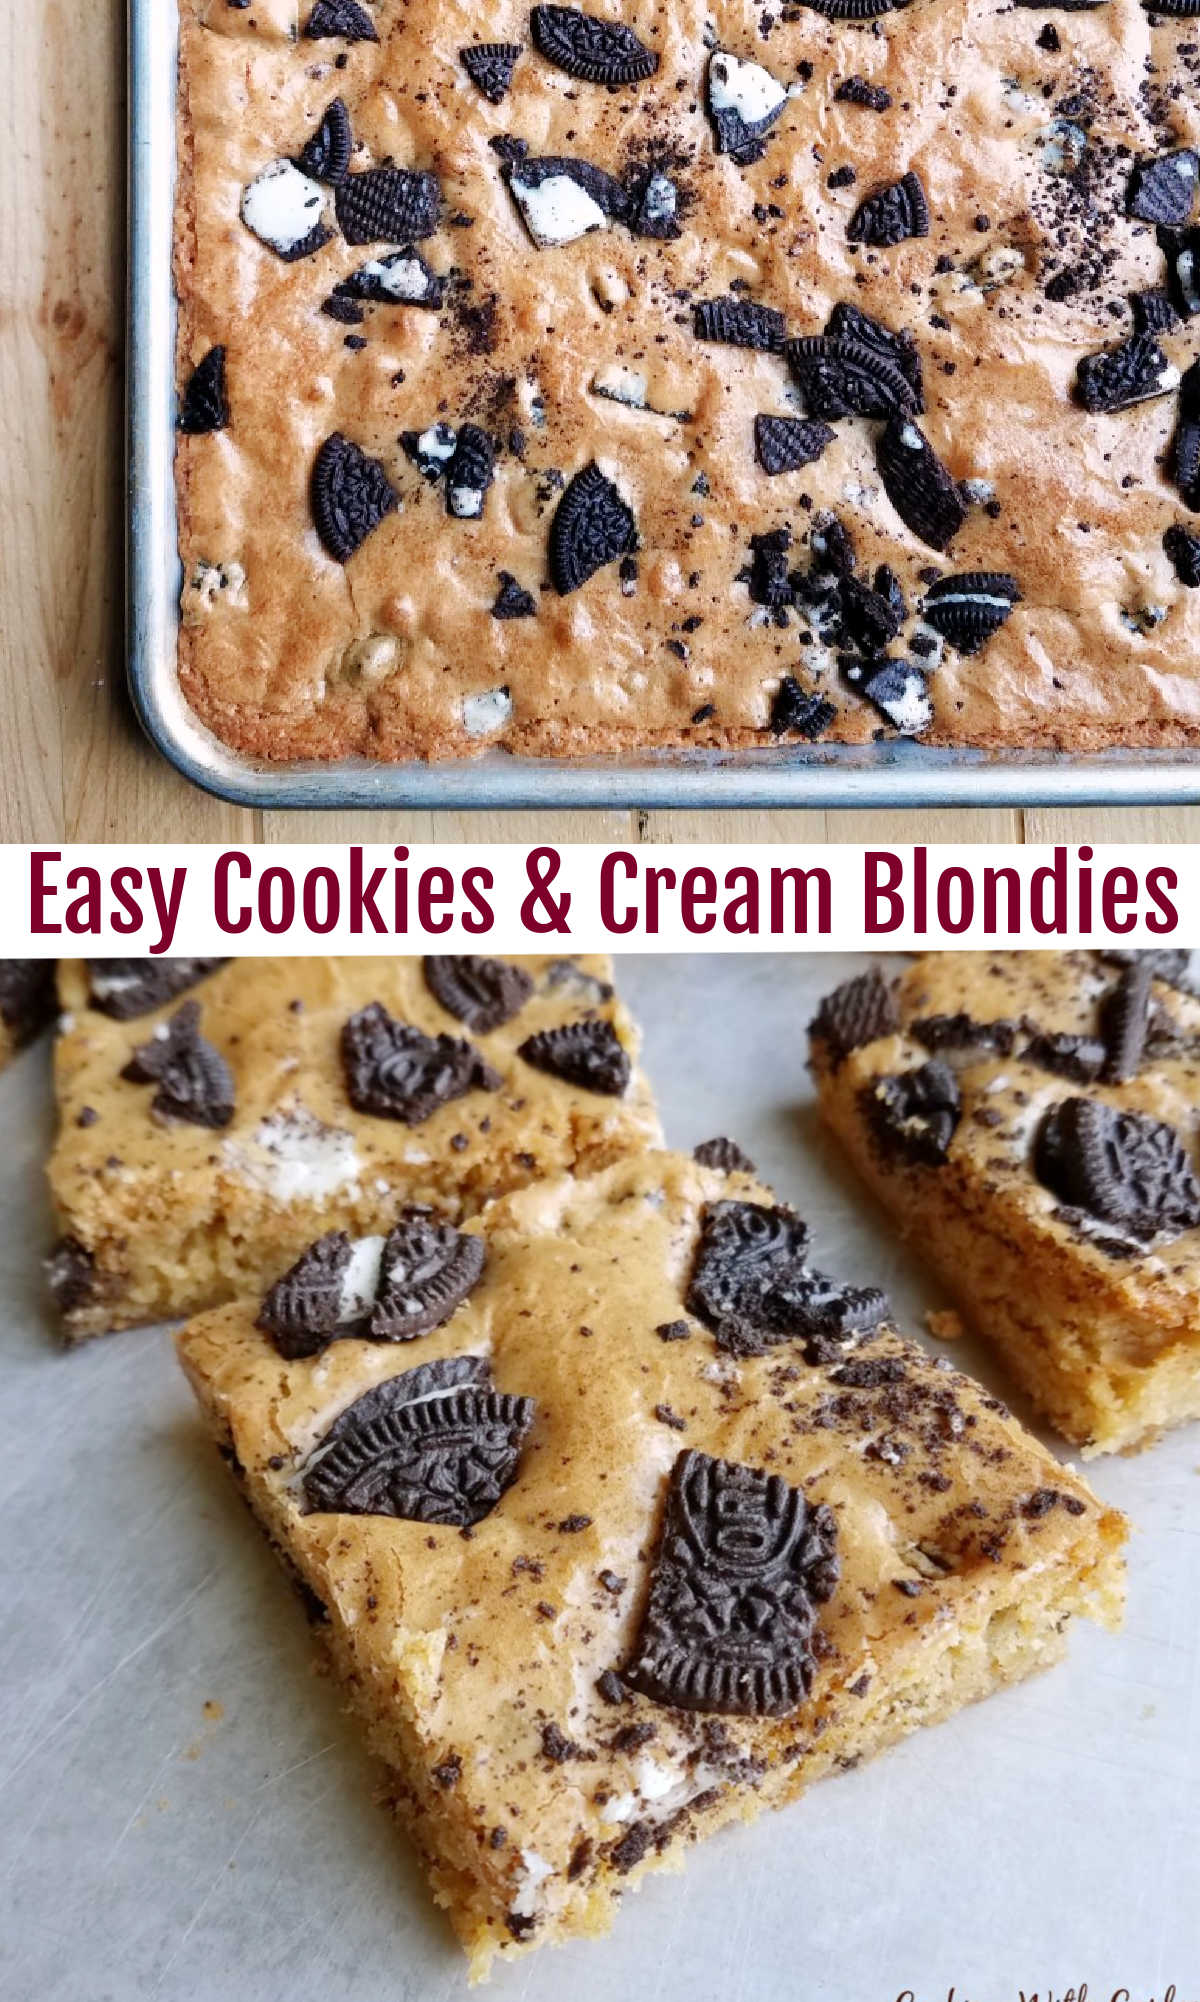 A nice big batch of brown sugary cookies and cream blondies is the perfect way to feed a crowd.  Bring them to your next potluck, BBQ or party and watch them disappear.